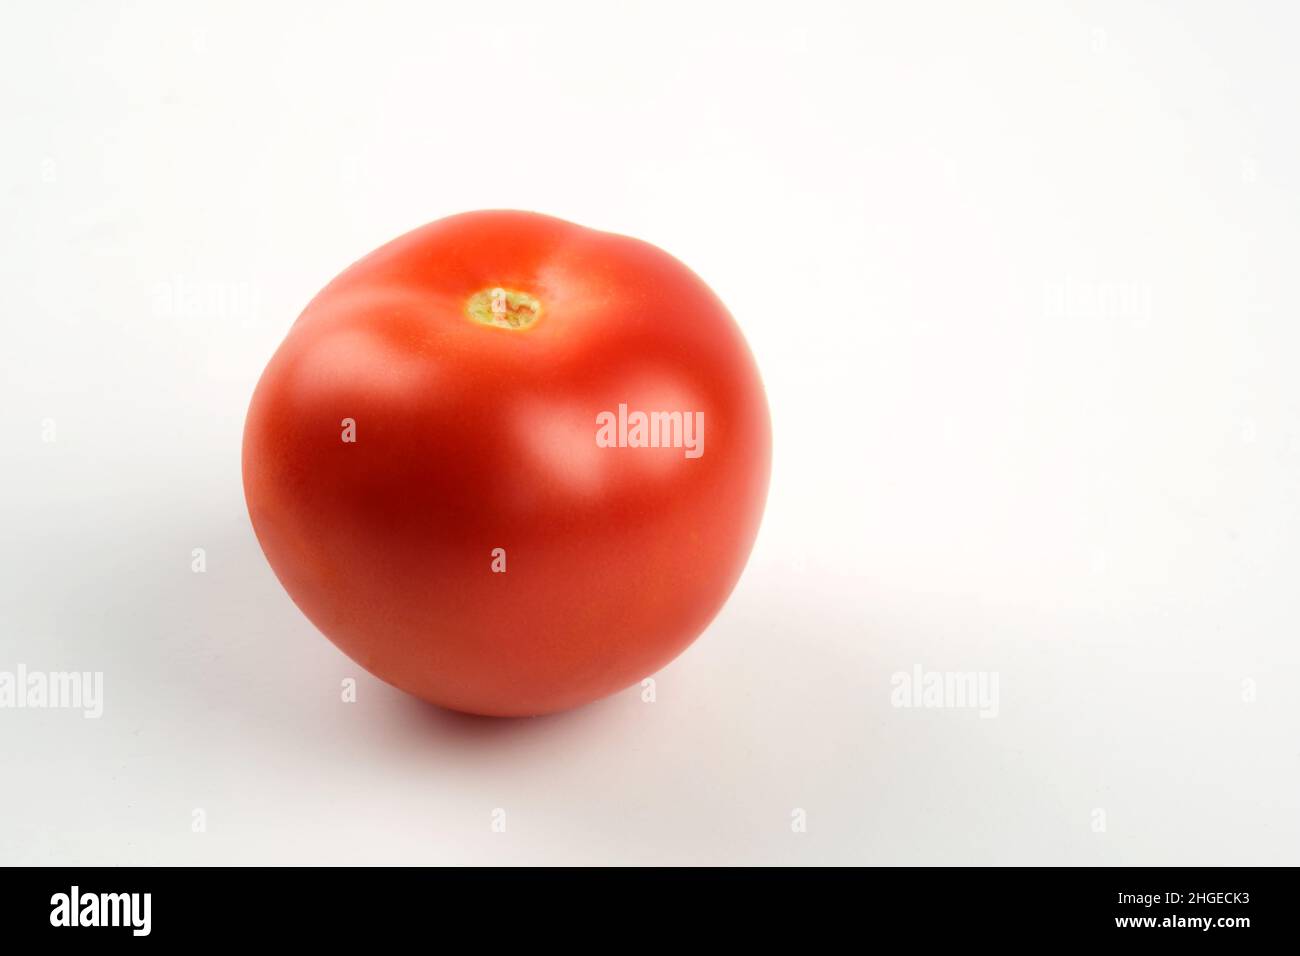 Close up shot of a single tomato on a white background Stock Photo